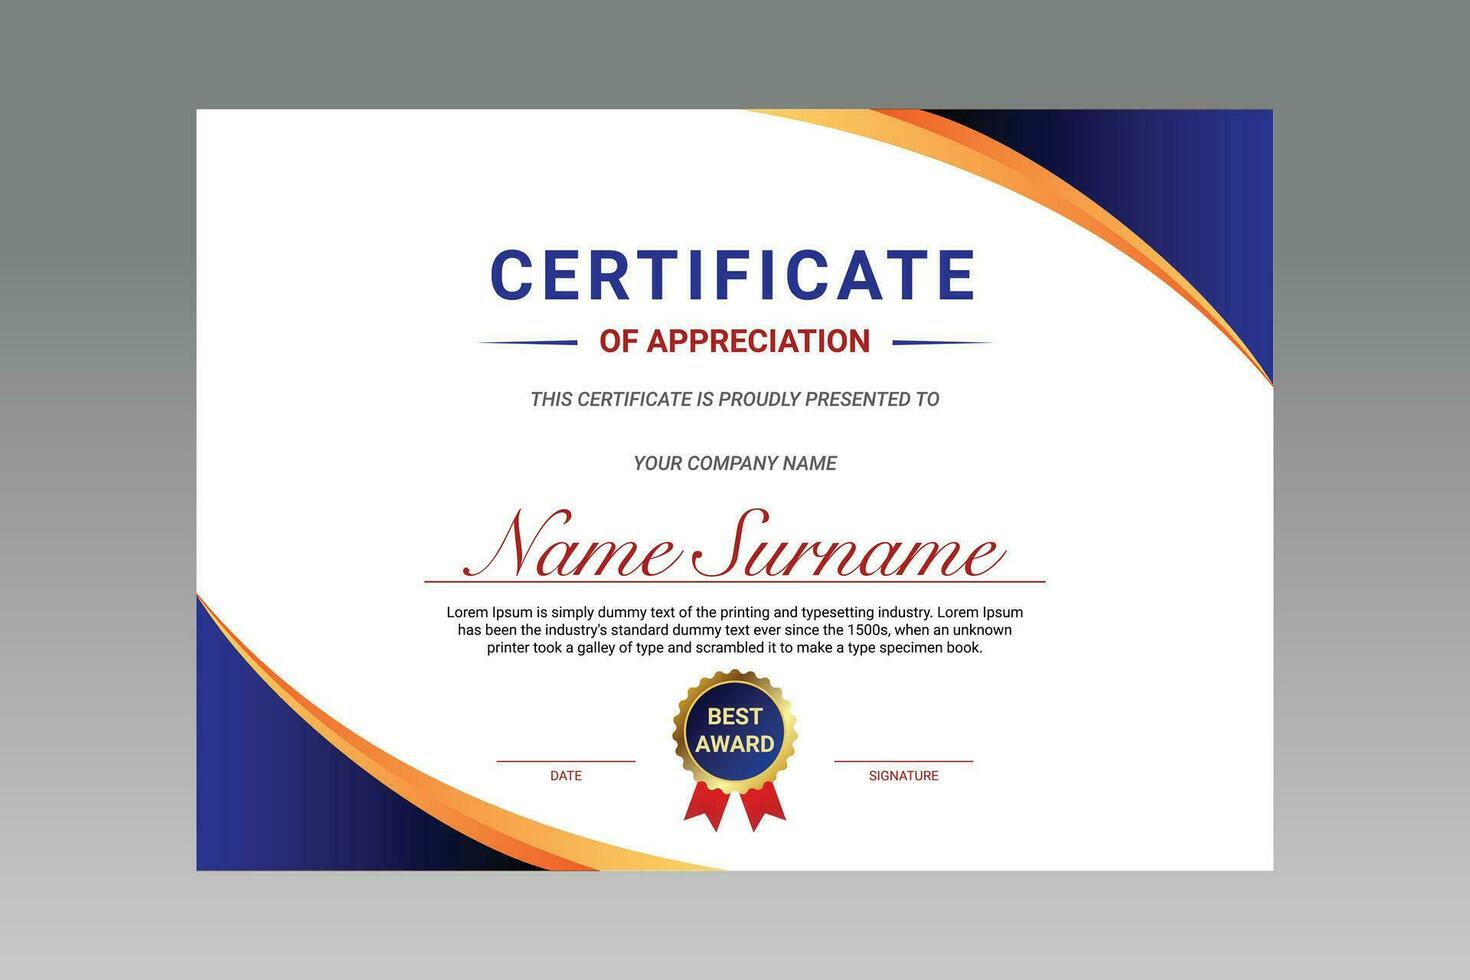 Certificate of appreciation template. Diploma of college or university vector